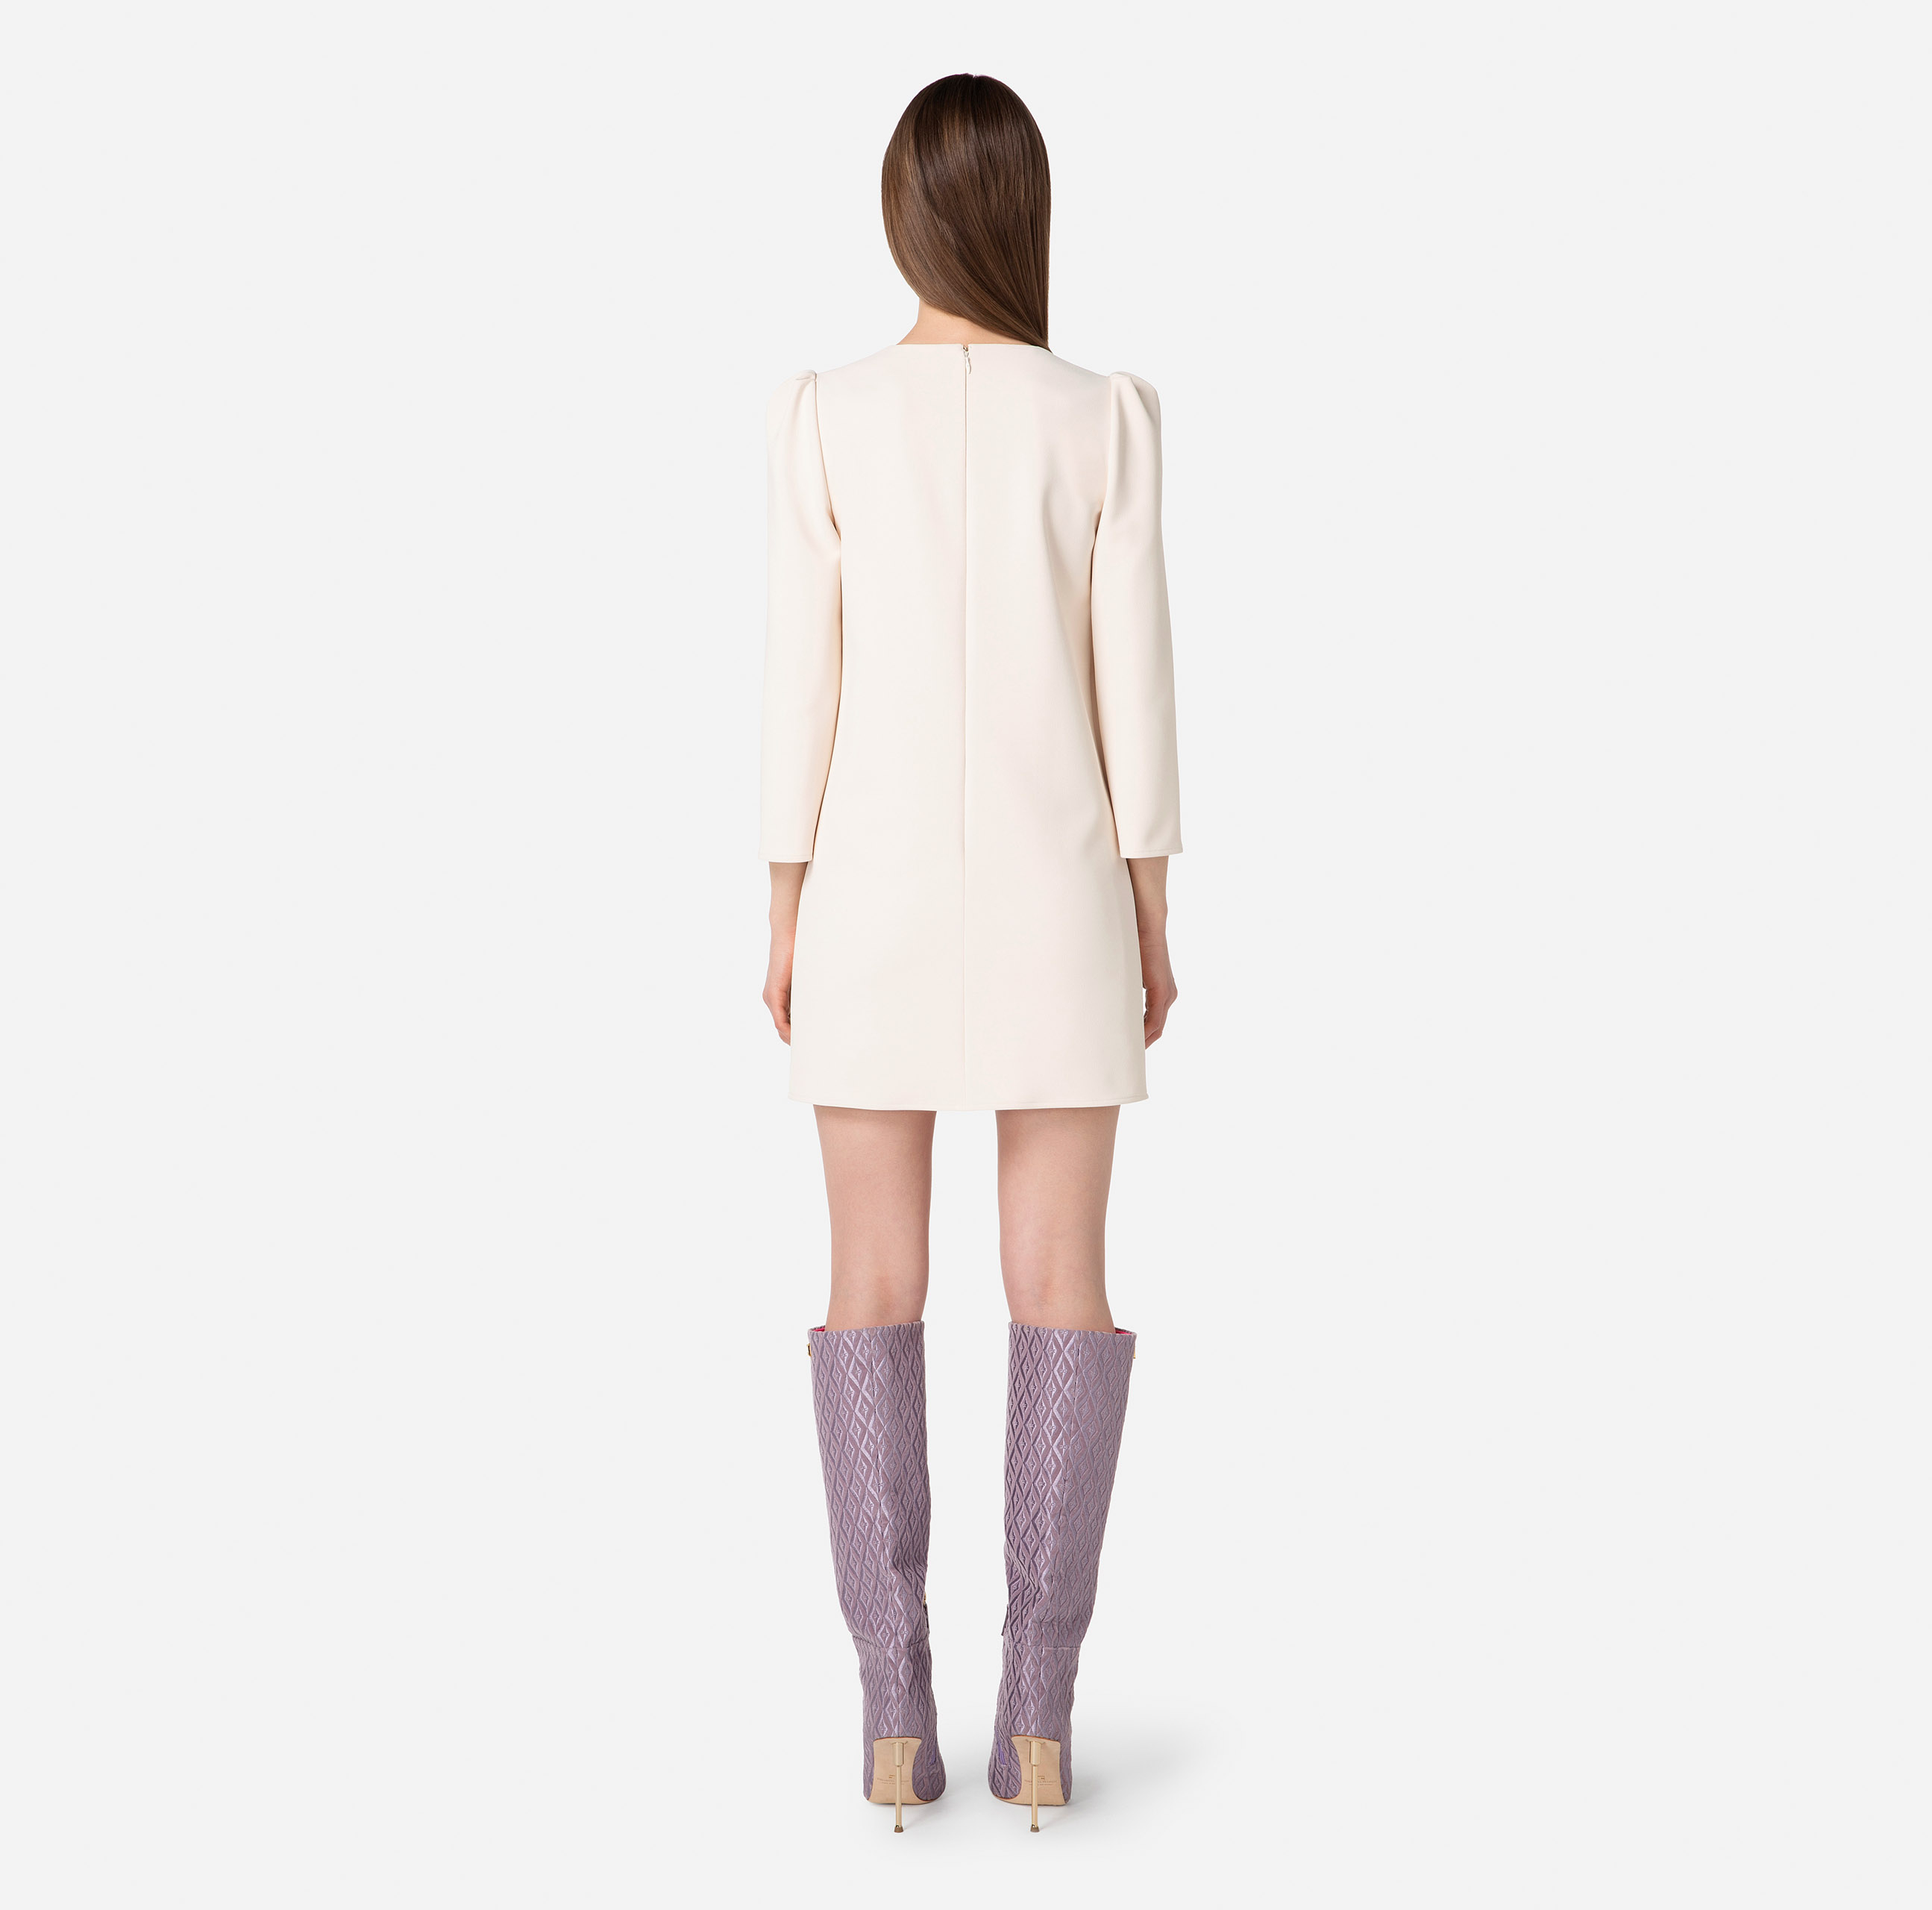 Mini-dress in double layer crêpe fabric with lettering - Elisabetta Franchi